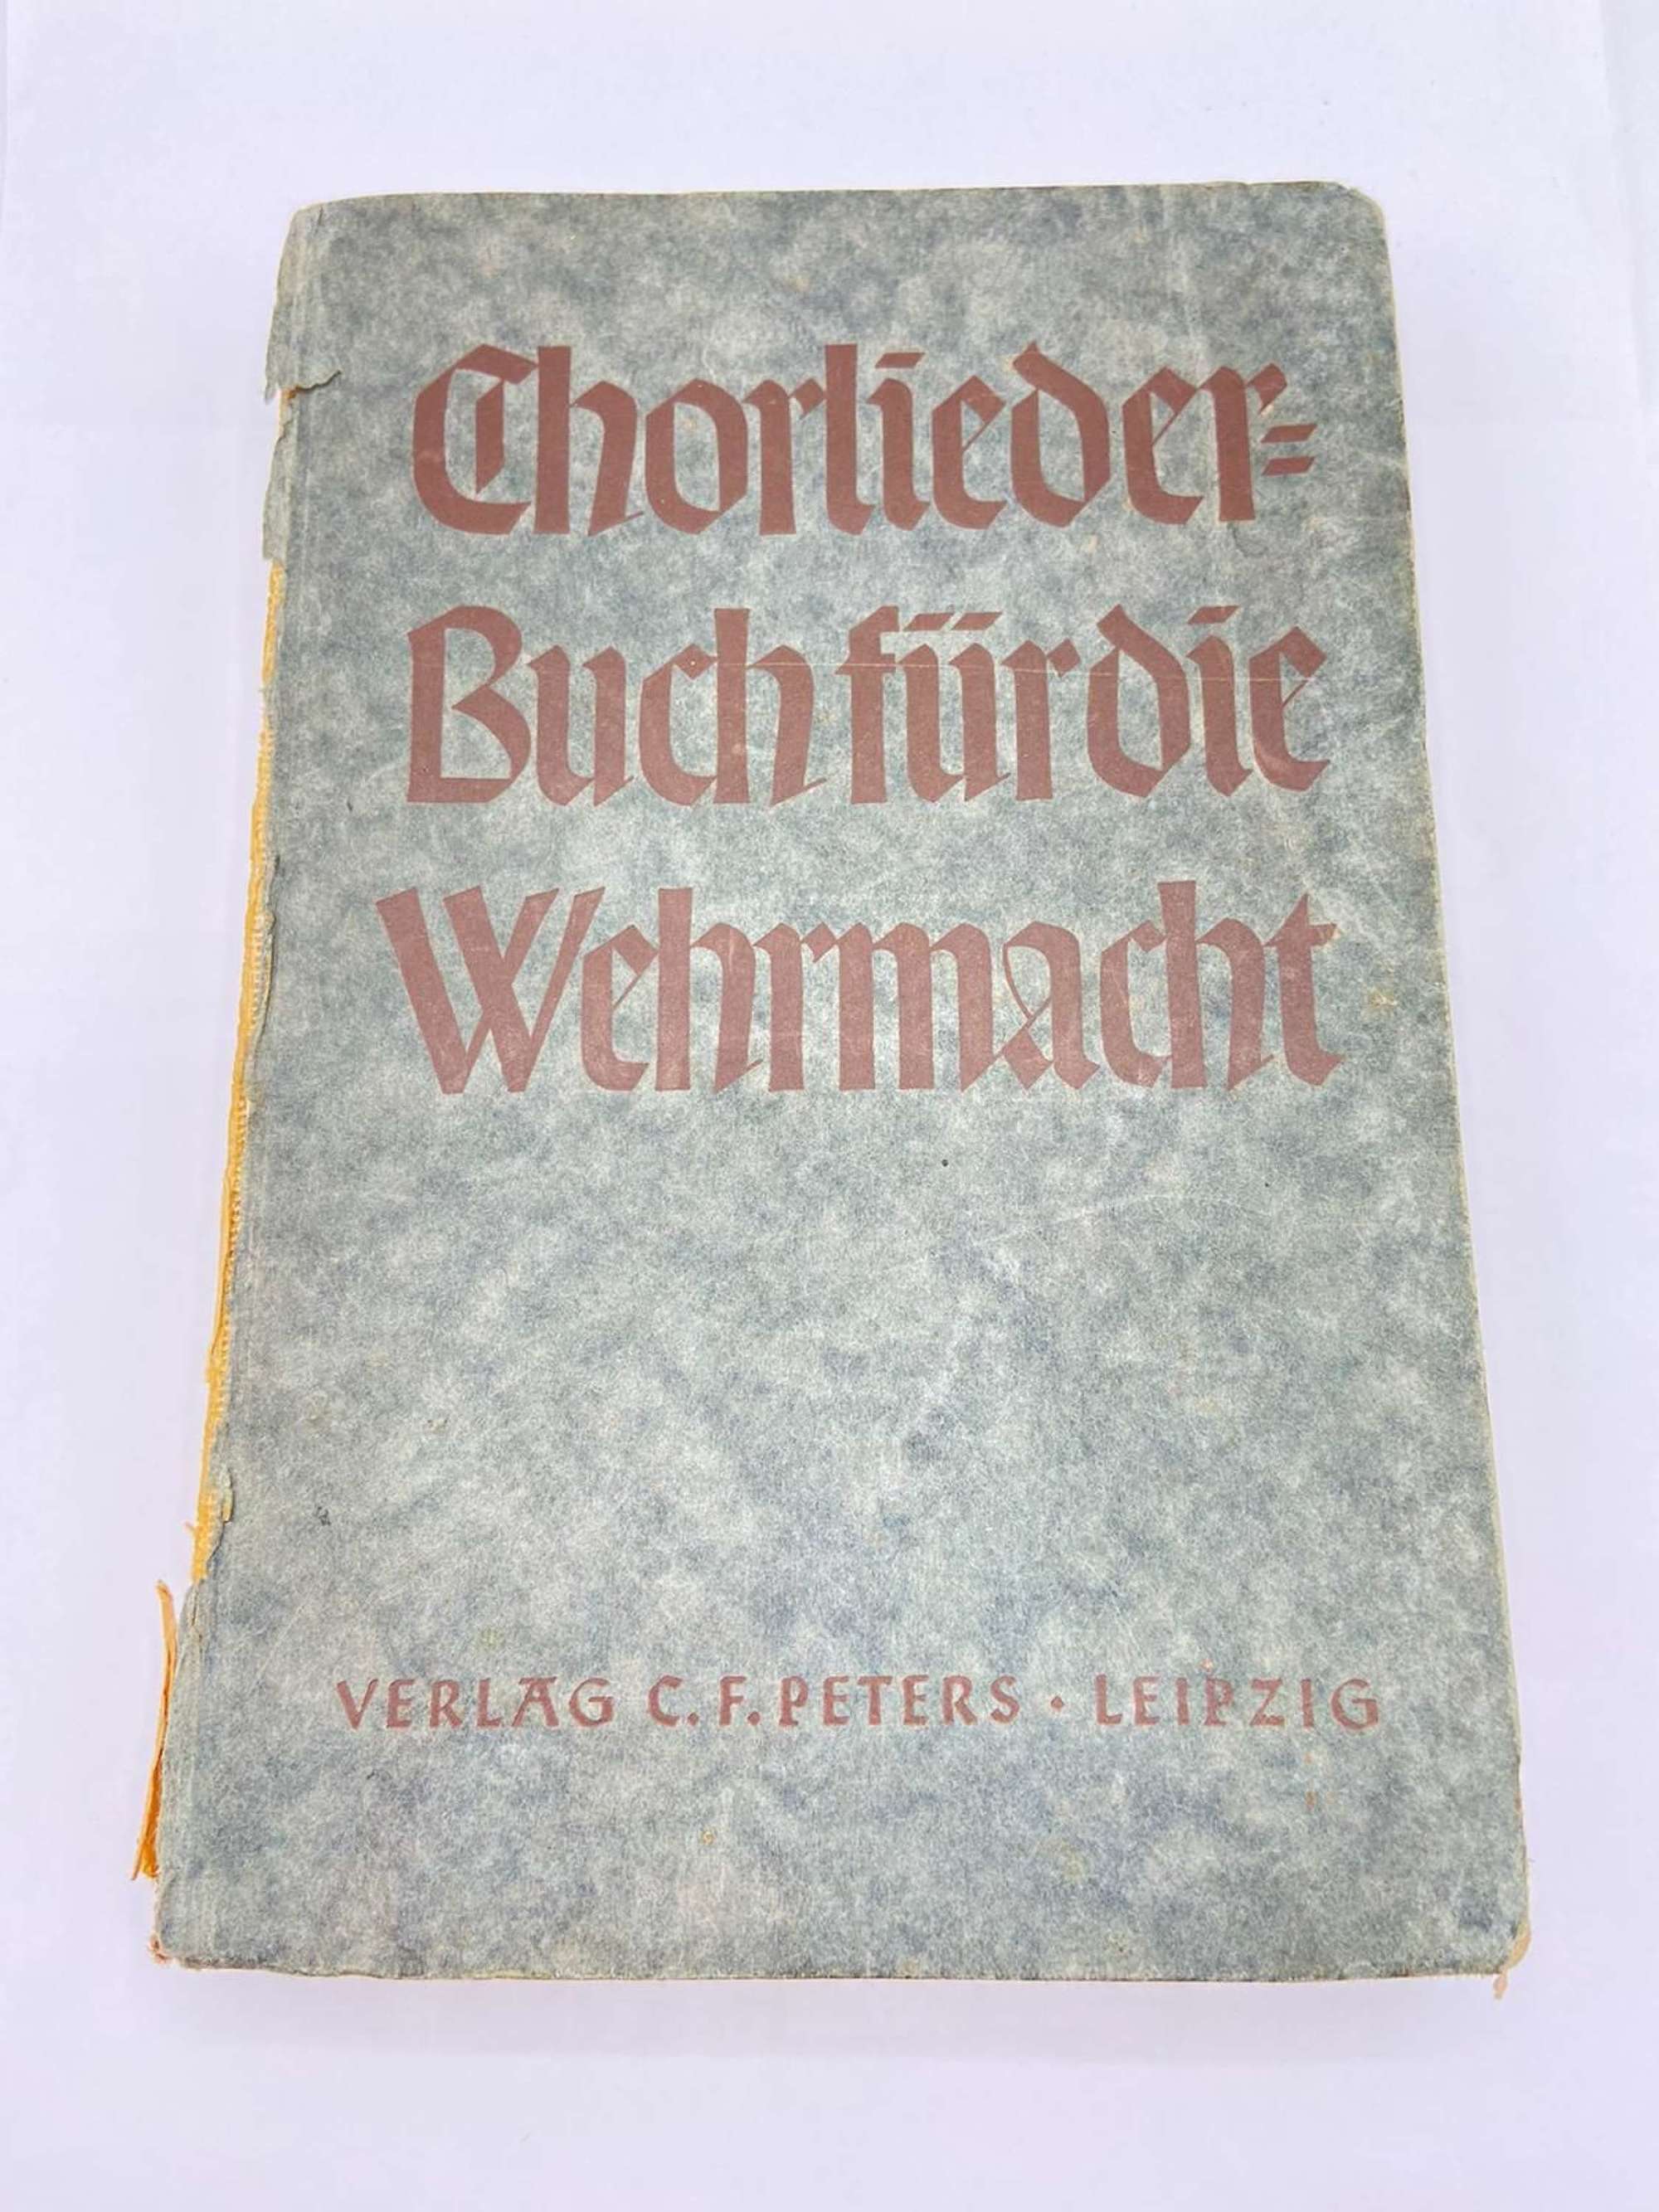 WW2 German Choral Song Book For The Wehrmacht 1940